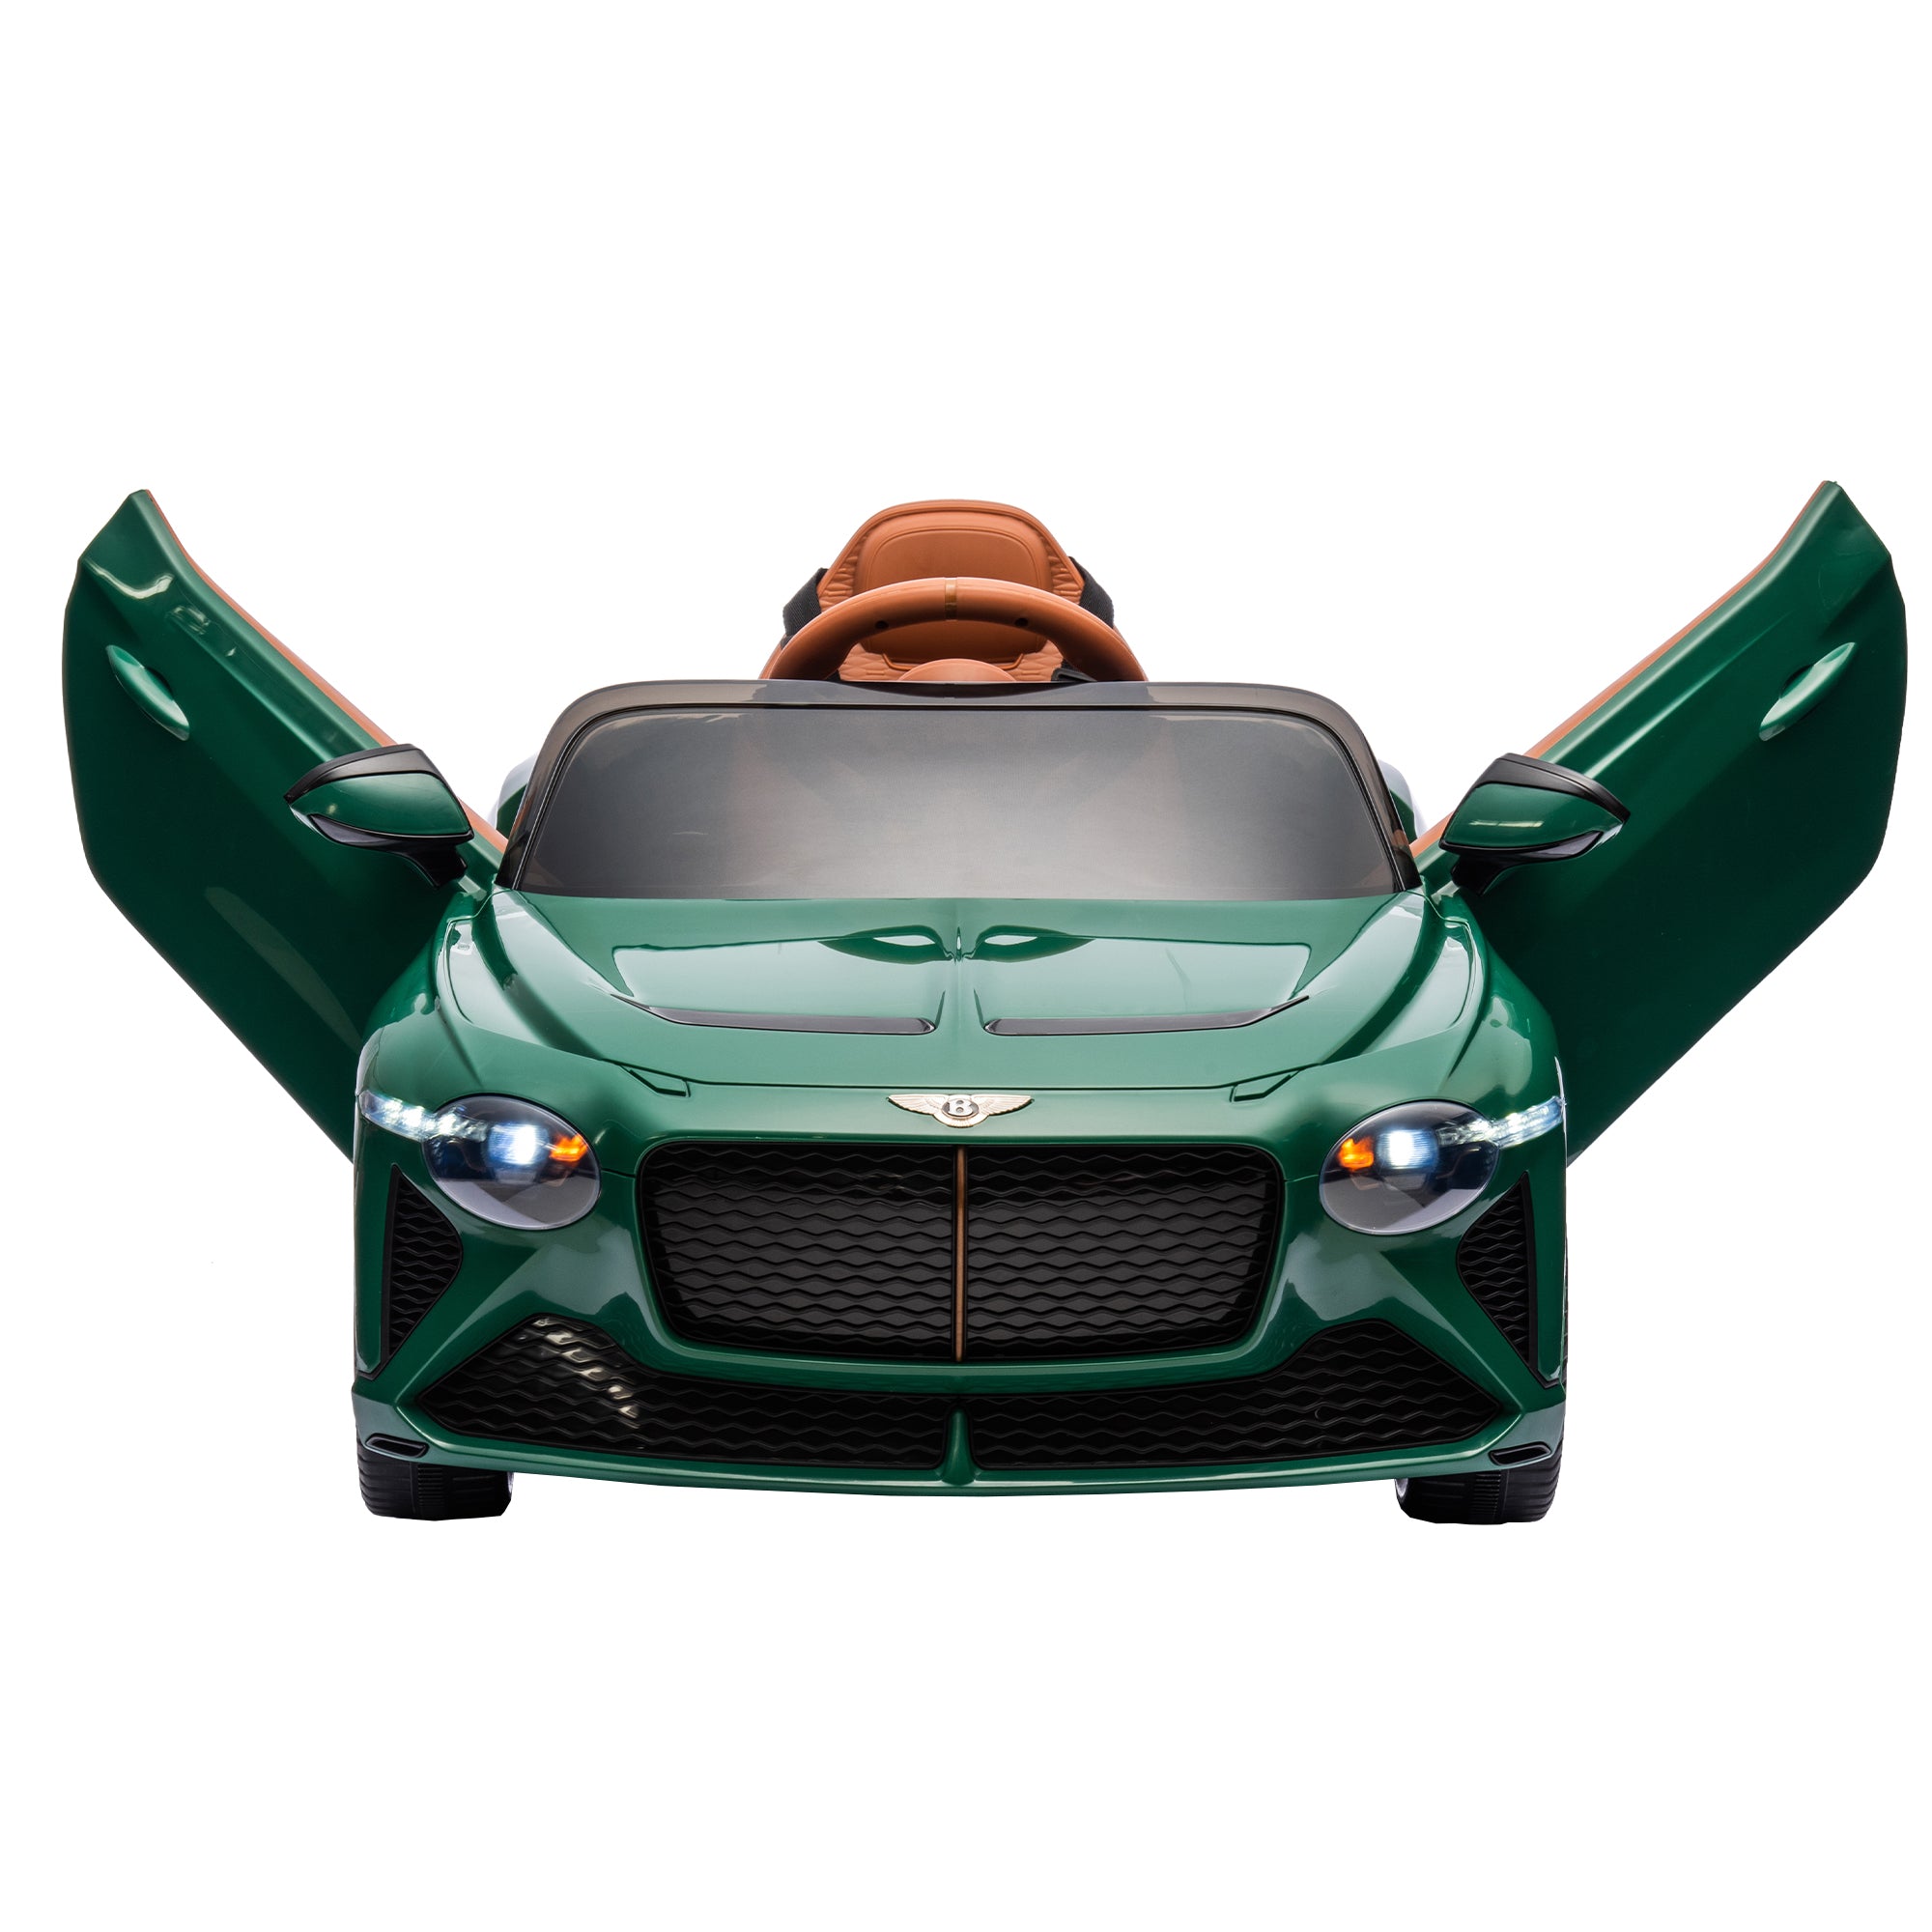 ZNTS Licensed Bentley Mulsanne,12v7A Kids ride on car 2.4G W/Parents Remote Control,electric car for W139694881